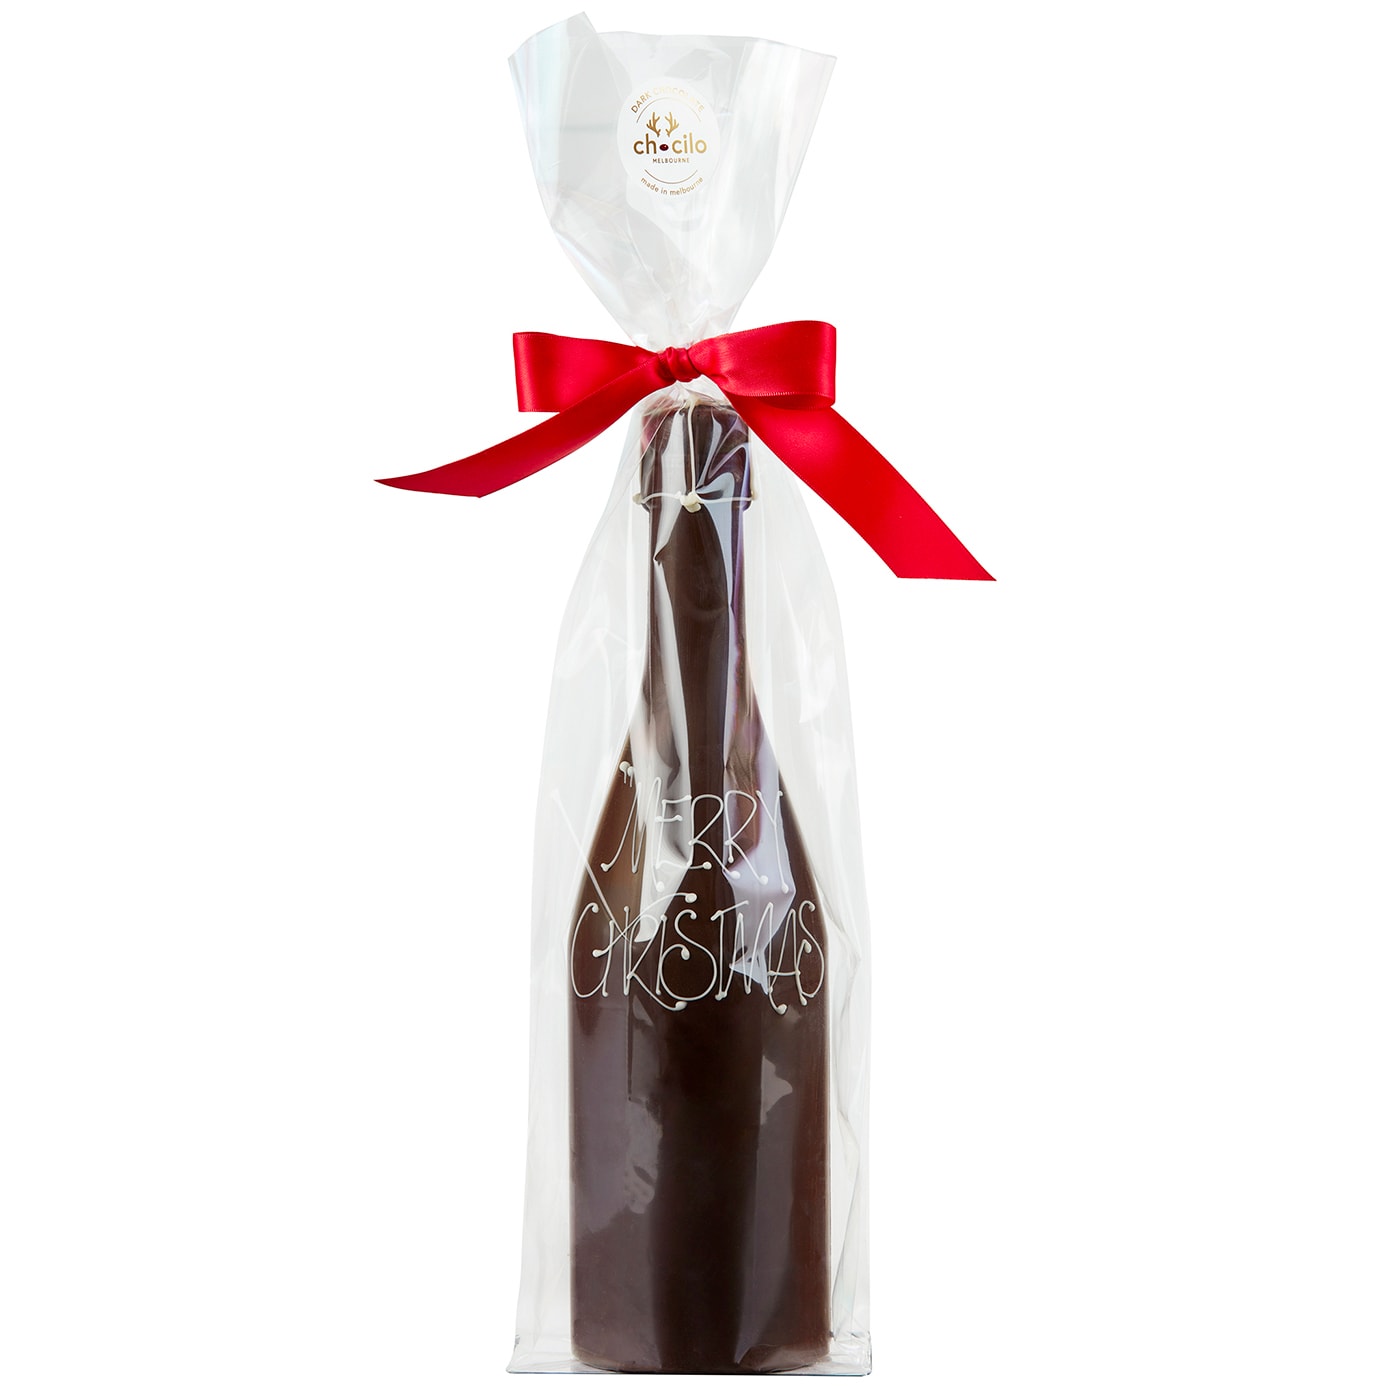 Chocilo Melbourne Large Christmas Dark Chocolate Champagne Bottle Gift. Hand made in Melbourne.